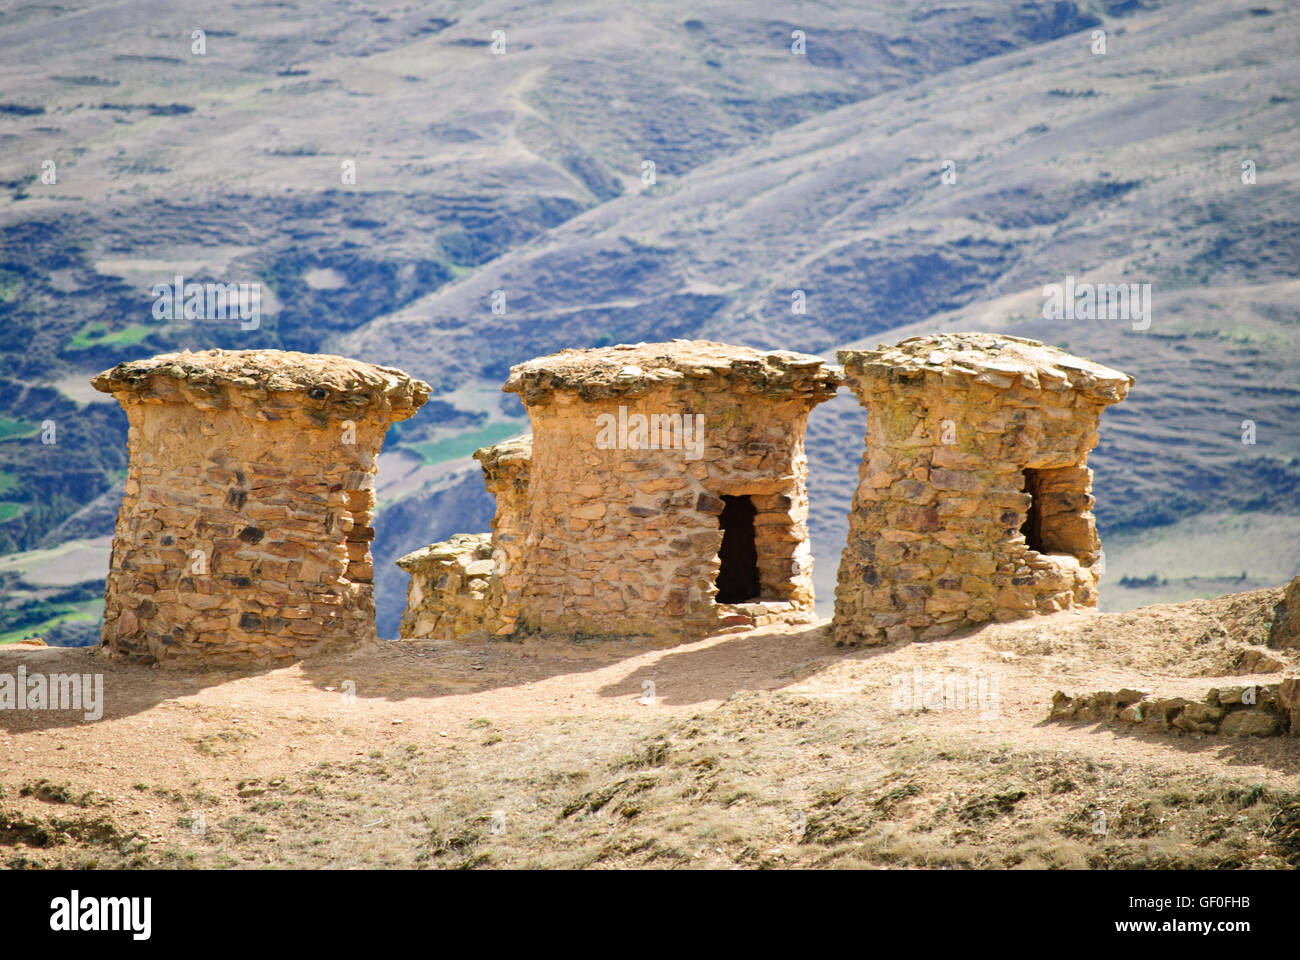 The ancient pre-Inca tombs of Ninamarka on the top on the mountains. Stock Photo